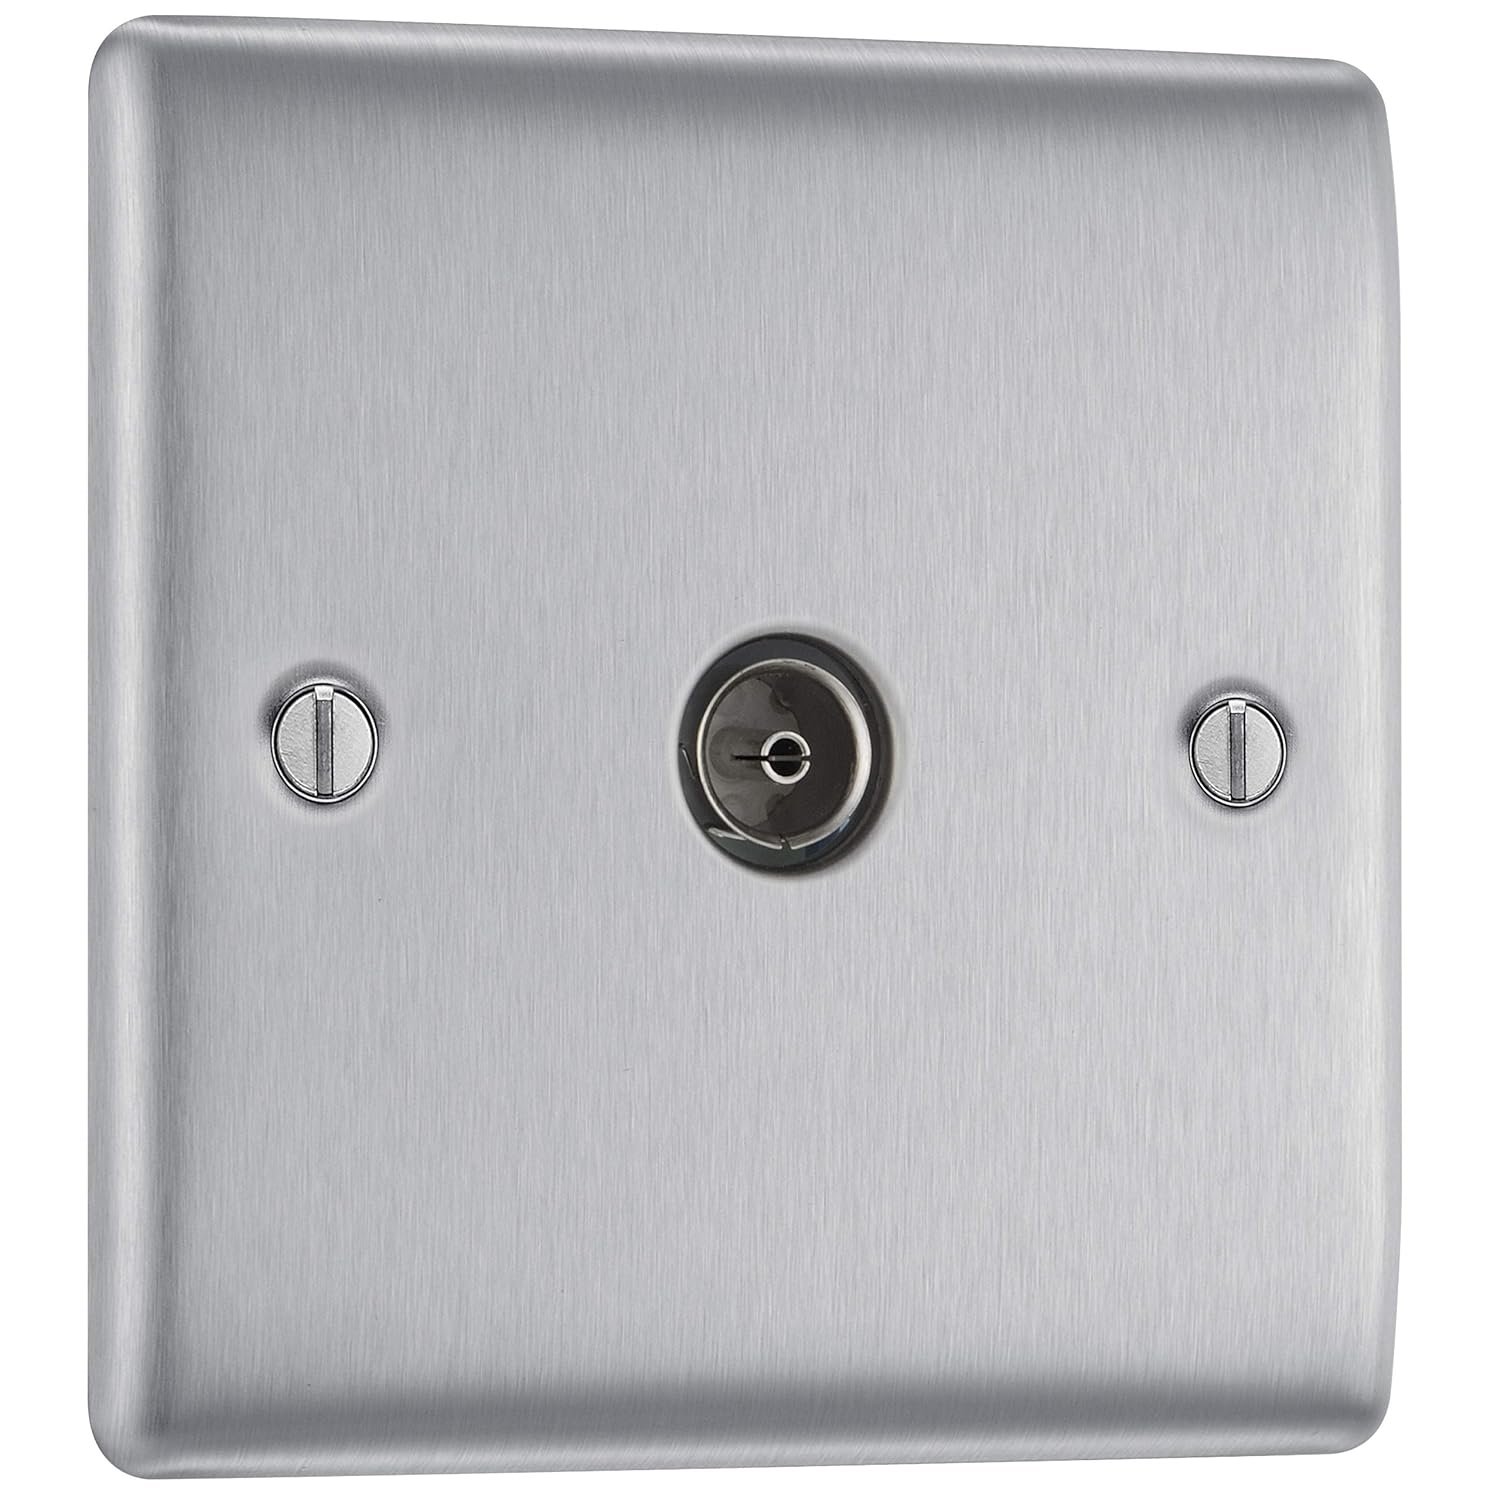 BG Electrical NBS60-01 Single Co-Axial Socket, Brushed Steel, 86mm x 86mm x 20mm